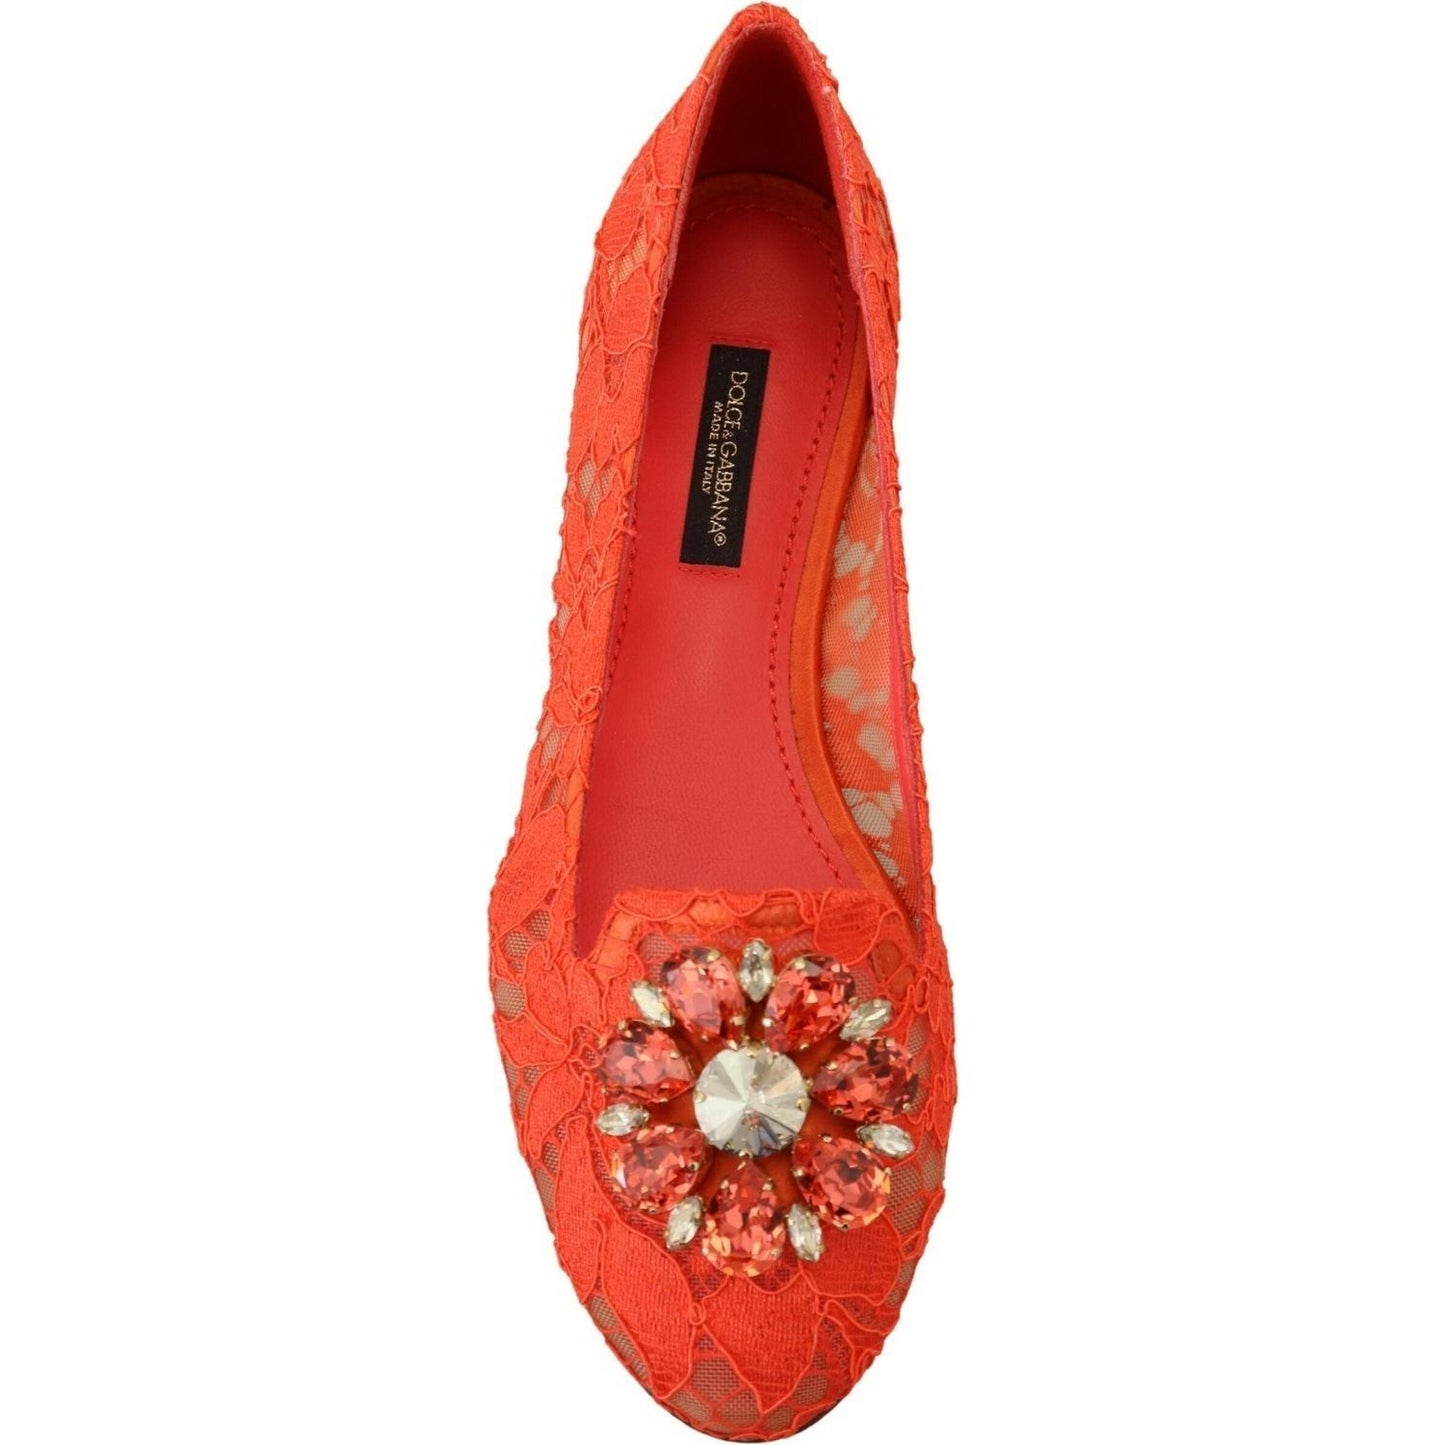 Dolce & Gabbana Elegant Lace Vally Flats in Coral Red red-taormina-lace-crystals-ballet-flats-shoes